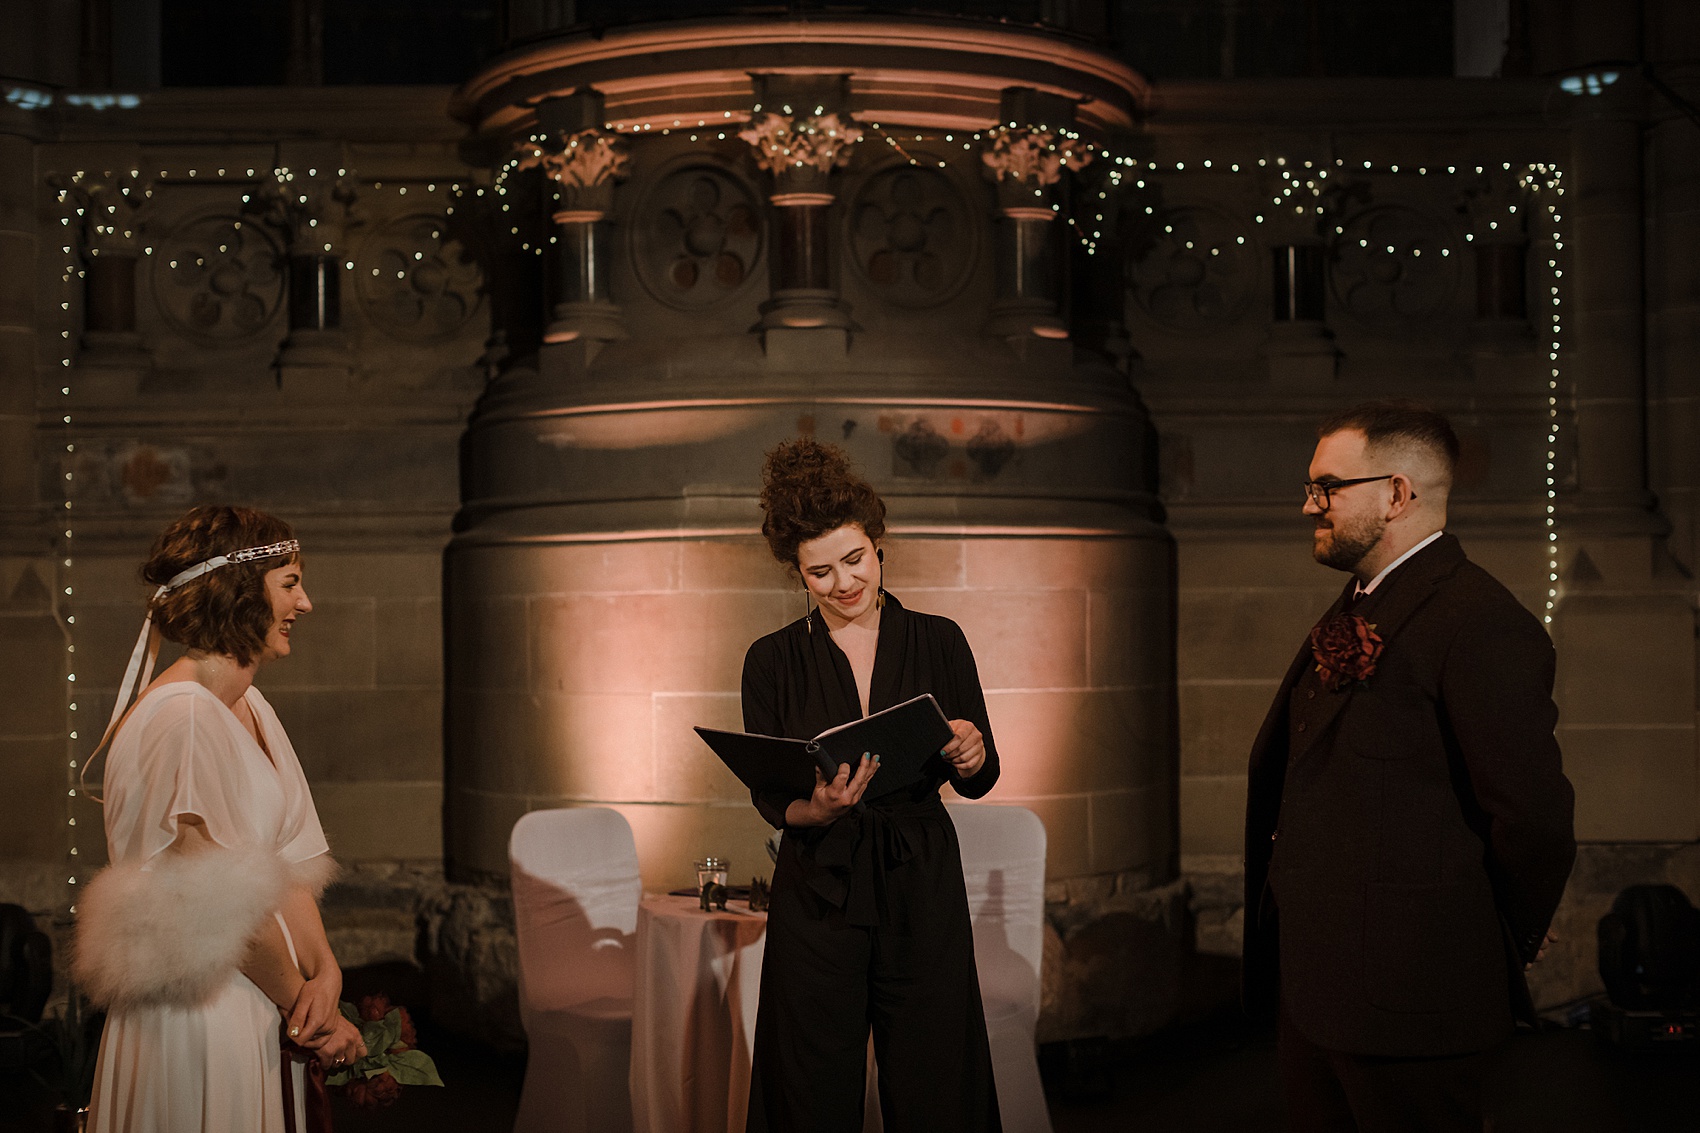 s bride Glasgow city wedding  - A 1920s Inspired Bride and her Fun and Informal Glasgow City Centre Wedding